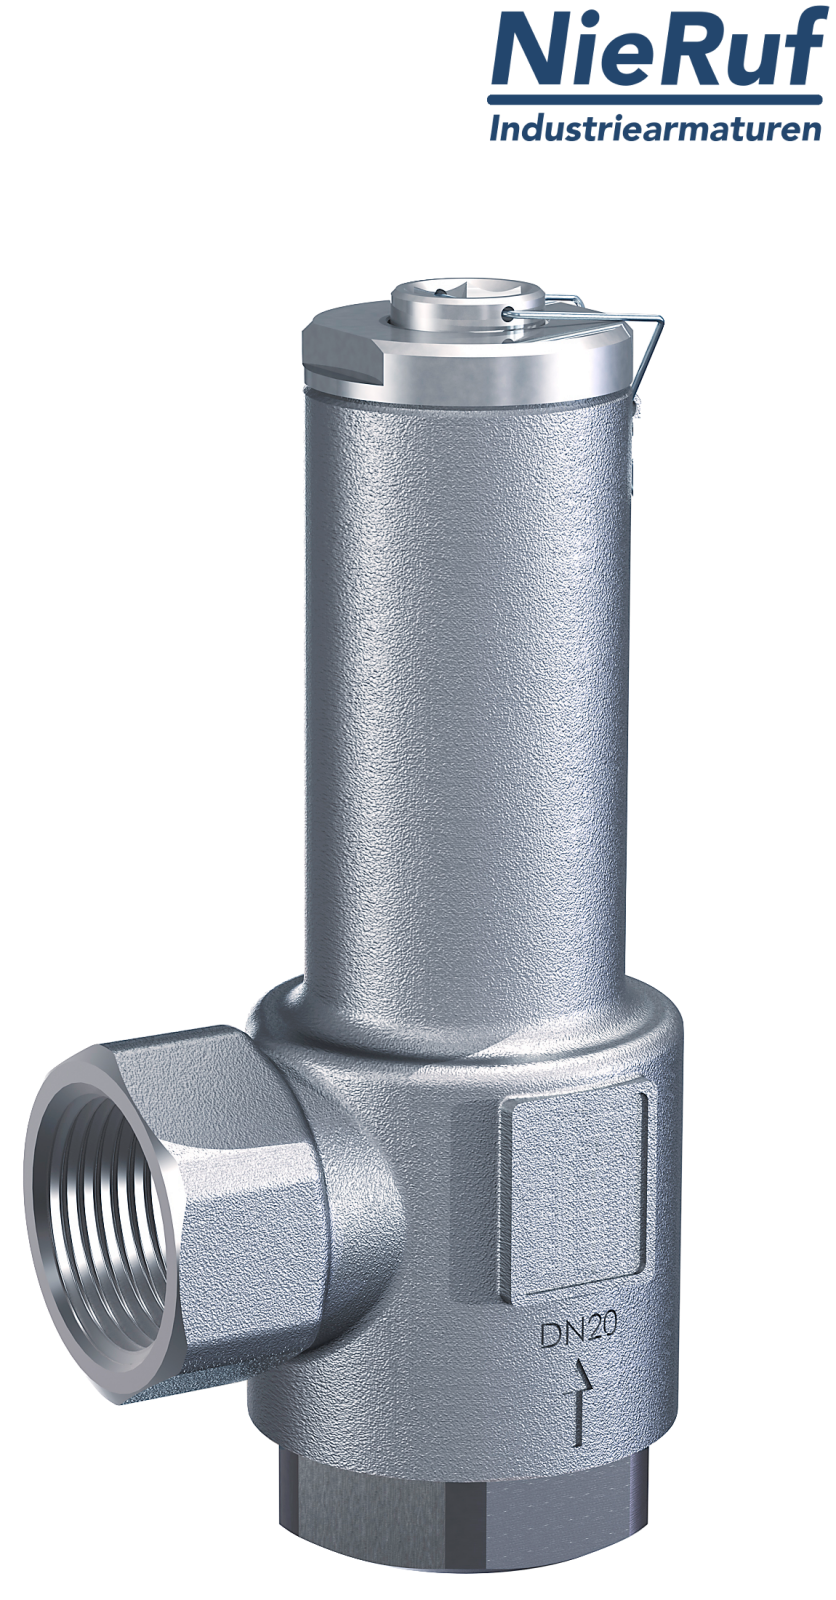 angle-type overflow valve 1/2" inch fm UV03 stainless steel AISI 316L 2 - 12 bar